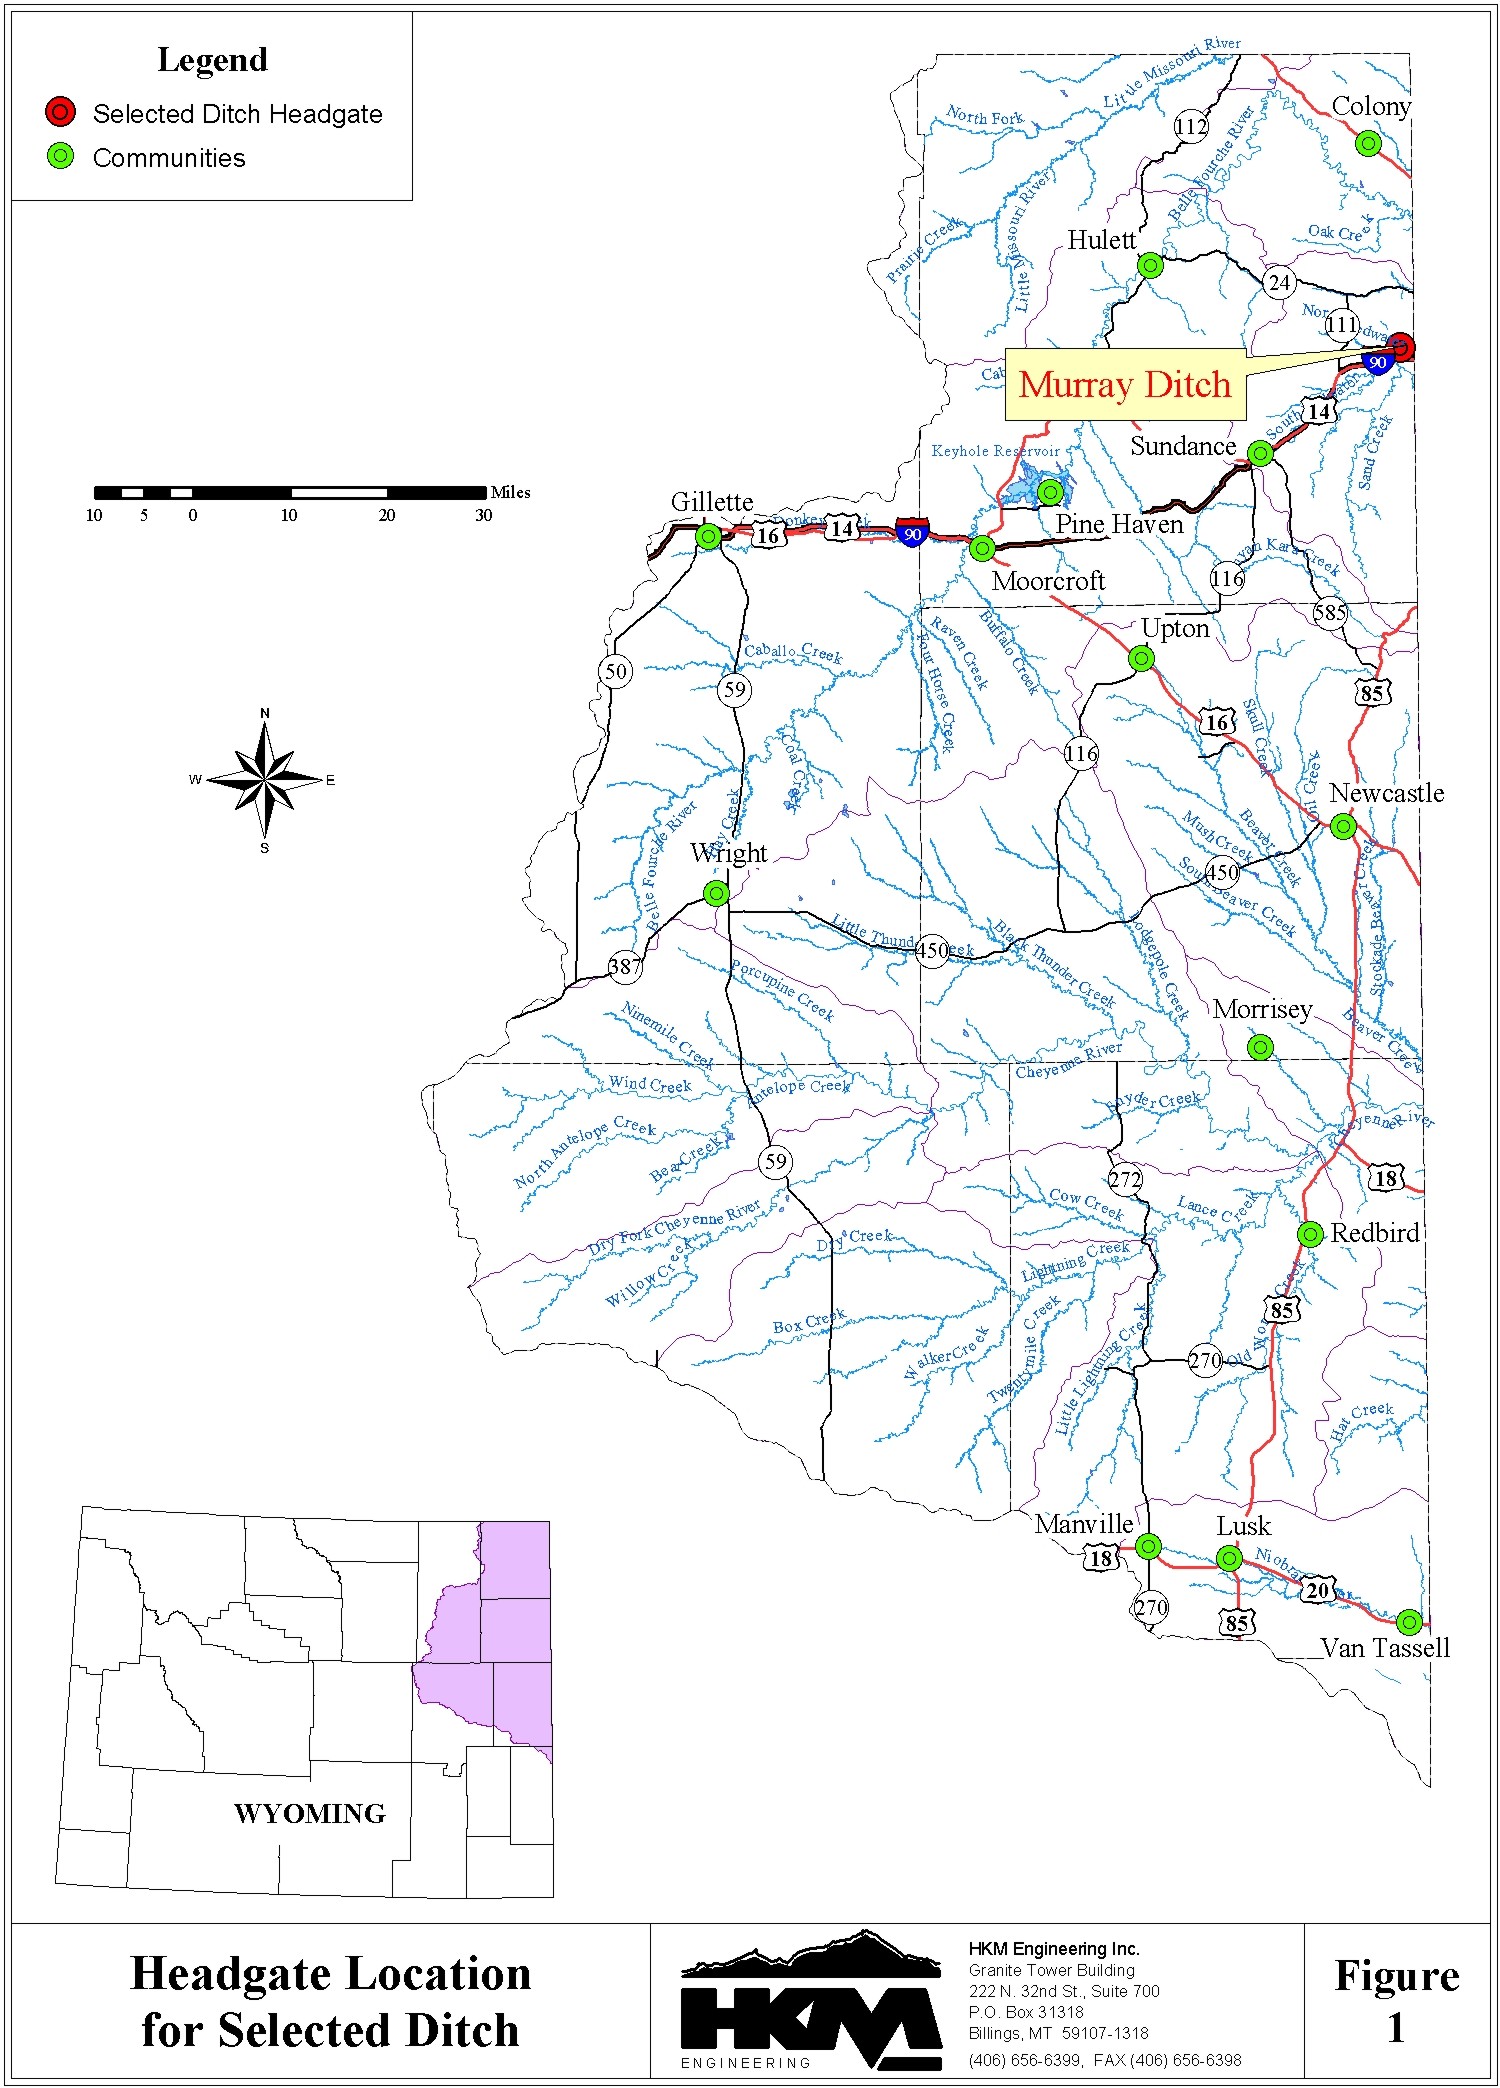 Headgate Location for Selected Ditch, Northeast Wyoming River Basins